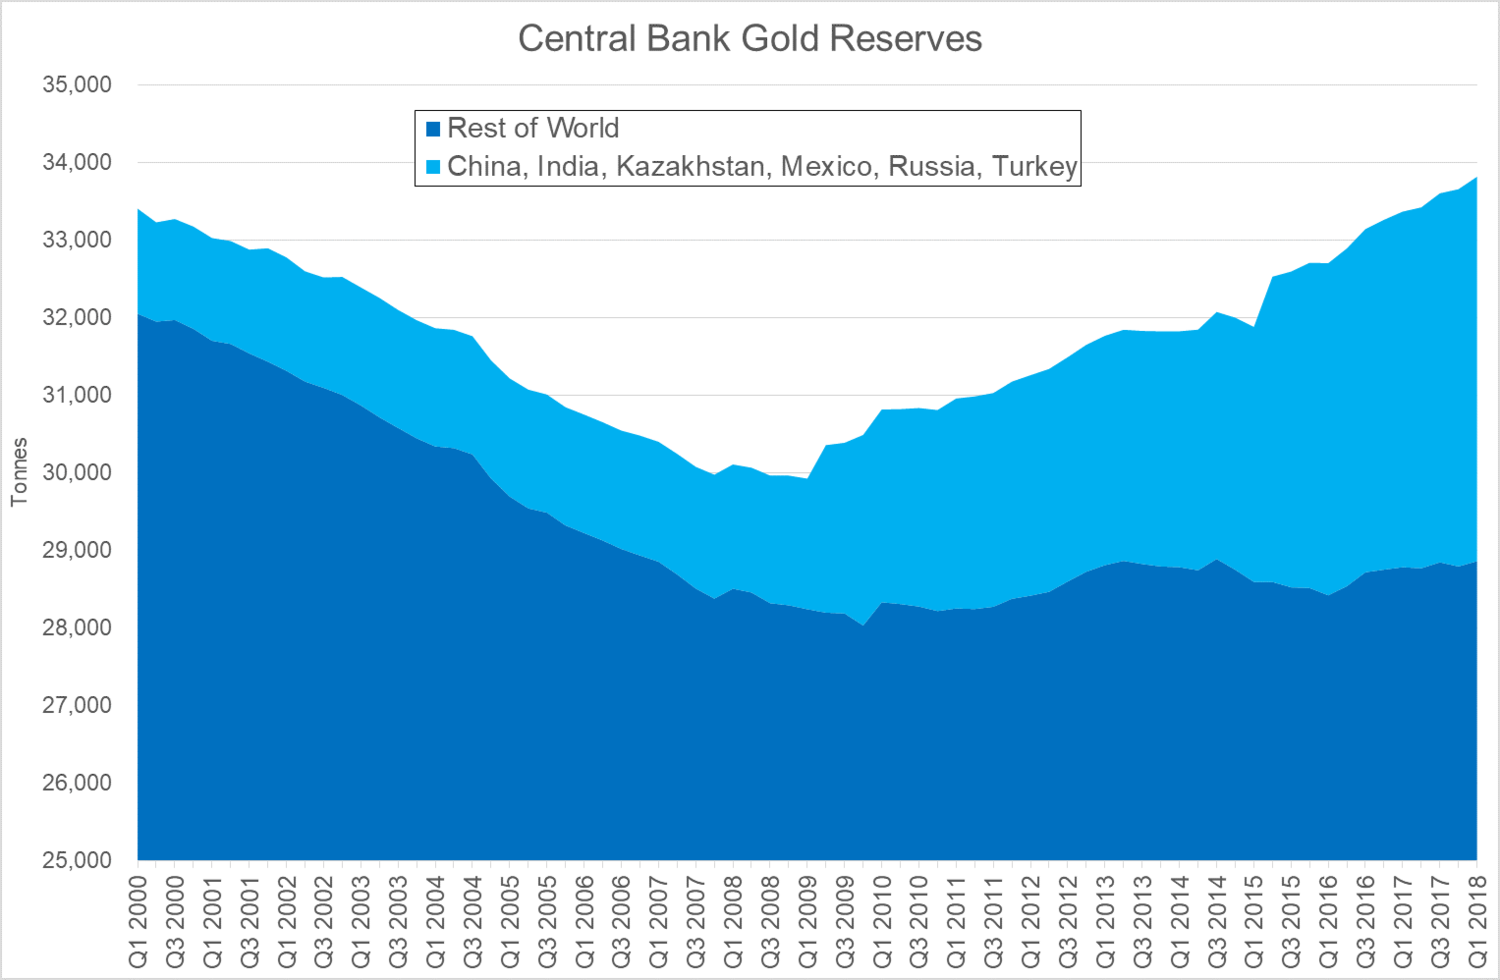 Central Banks Positivity Towards Gold Will Provide Long Term “Support To Gold Prices”